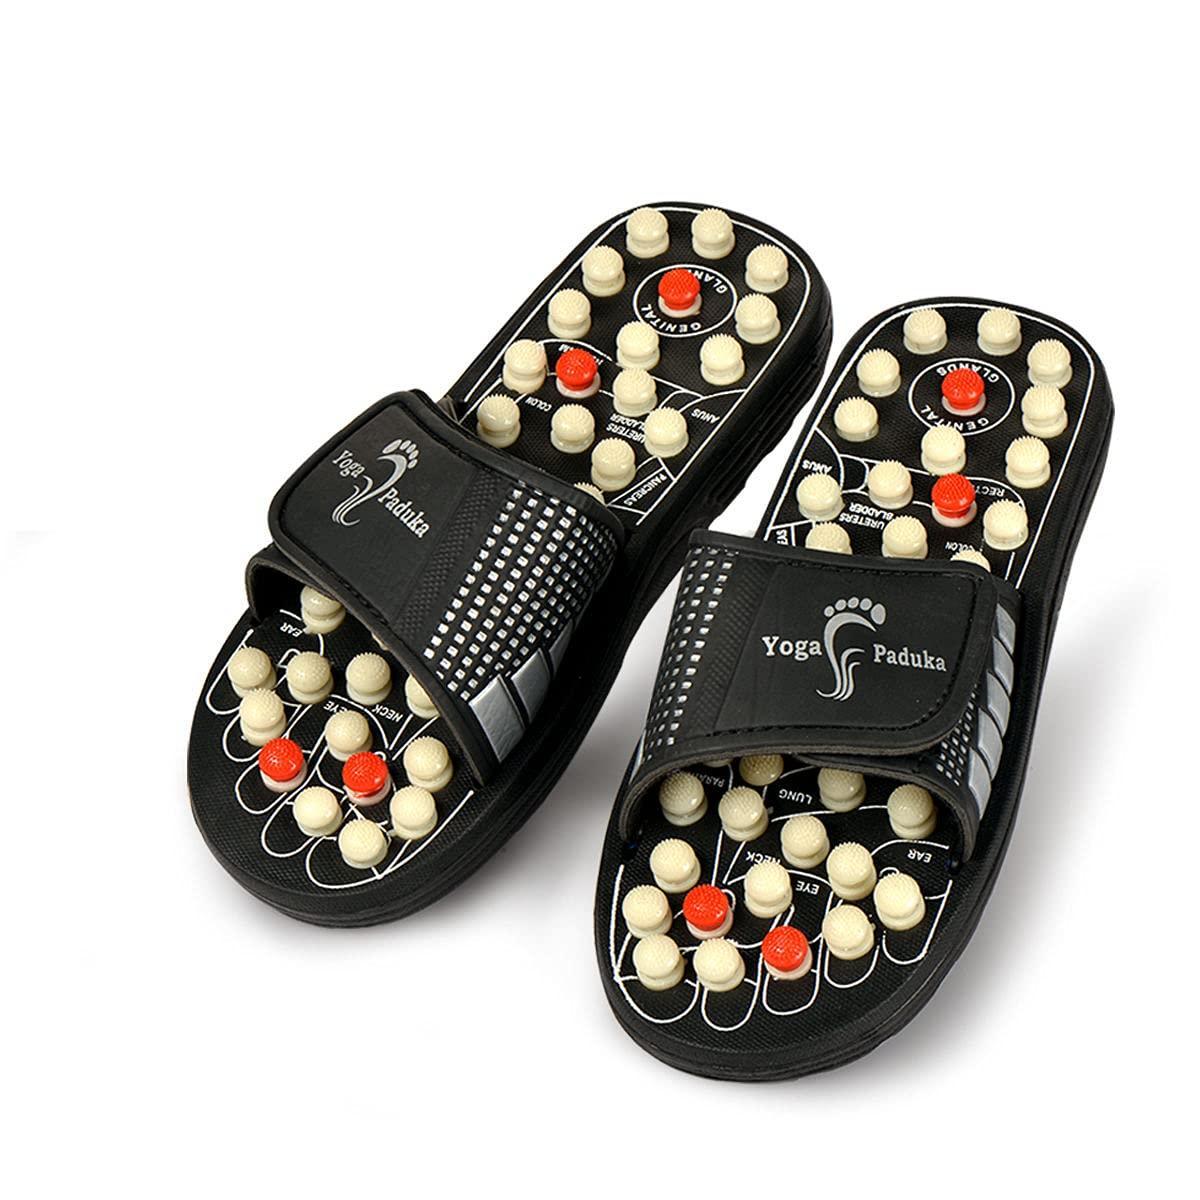 Manual Spring Acupressure and Magnetic Therapy Paduka Slippers for Full Body Blood Circulation Yoga Paduka